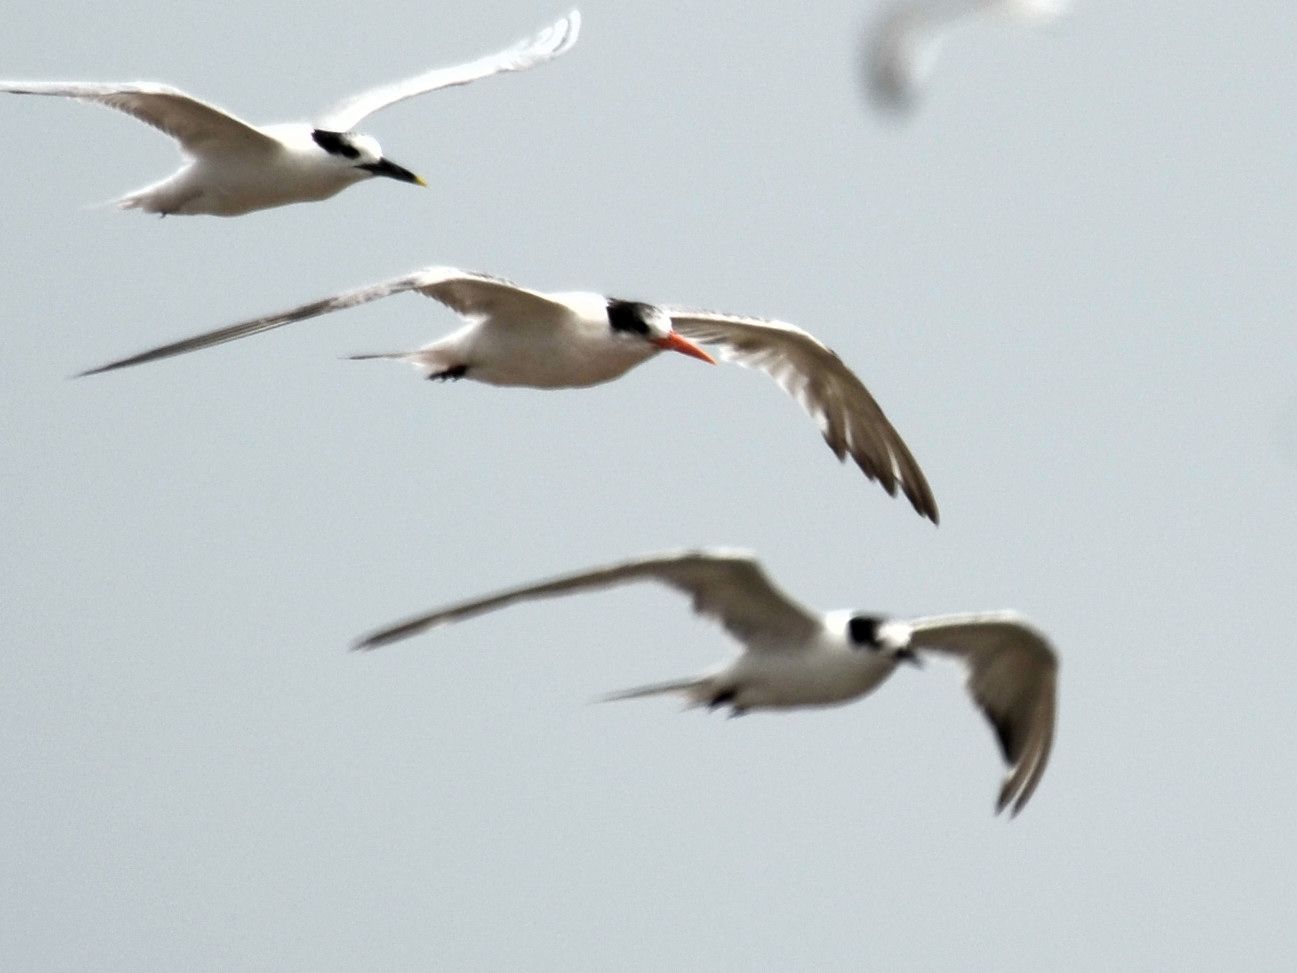 Click picture to see more Elegant Terns.